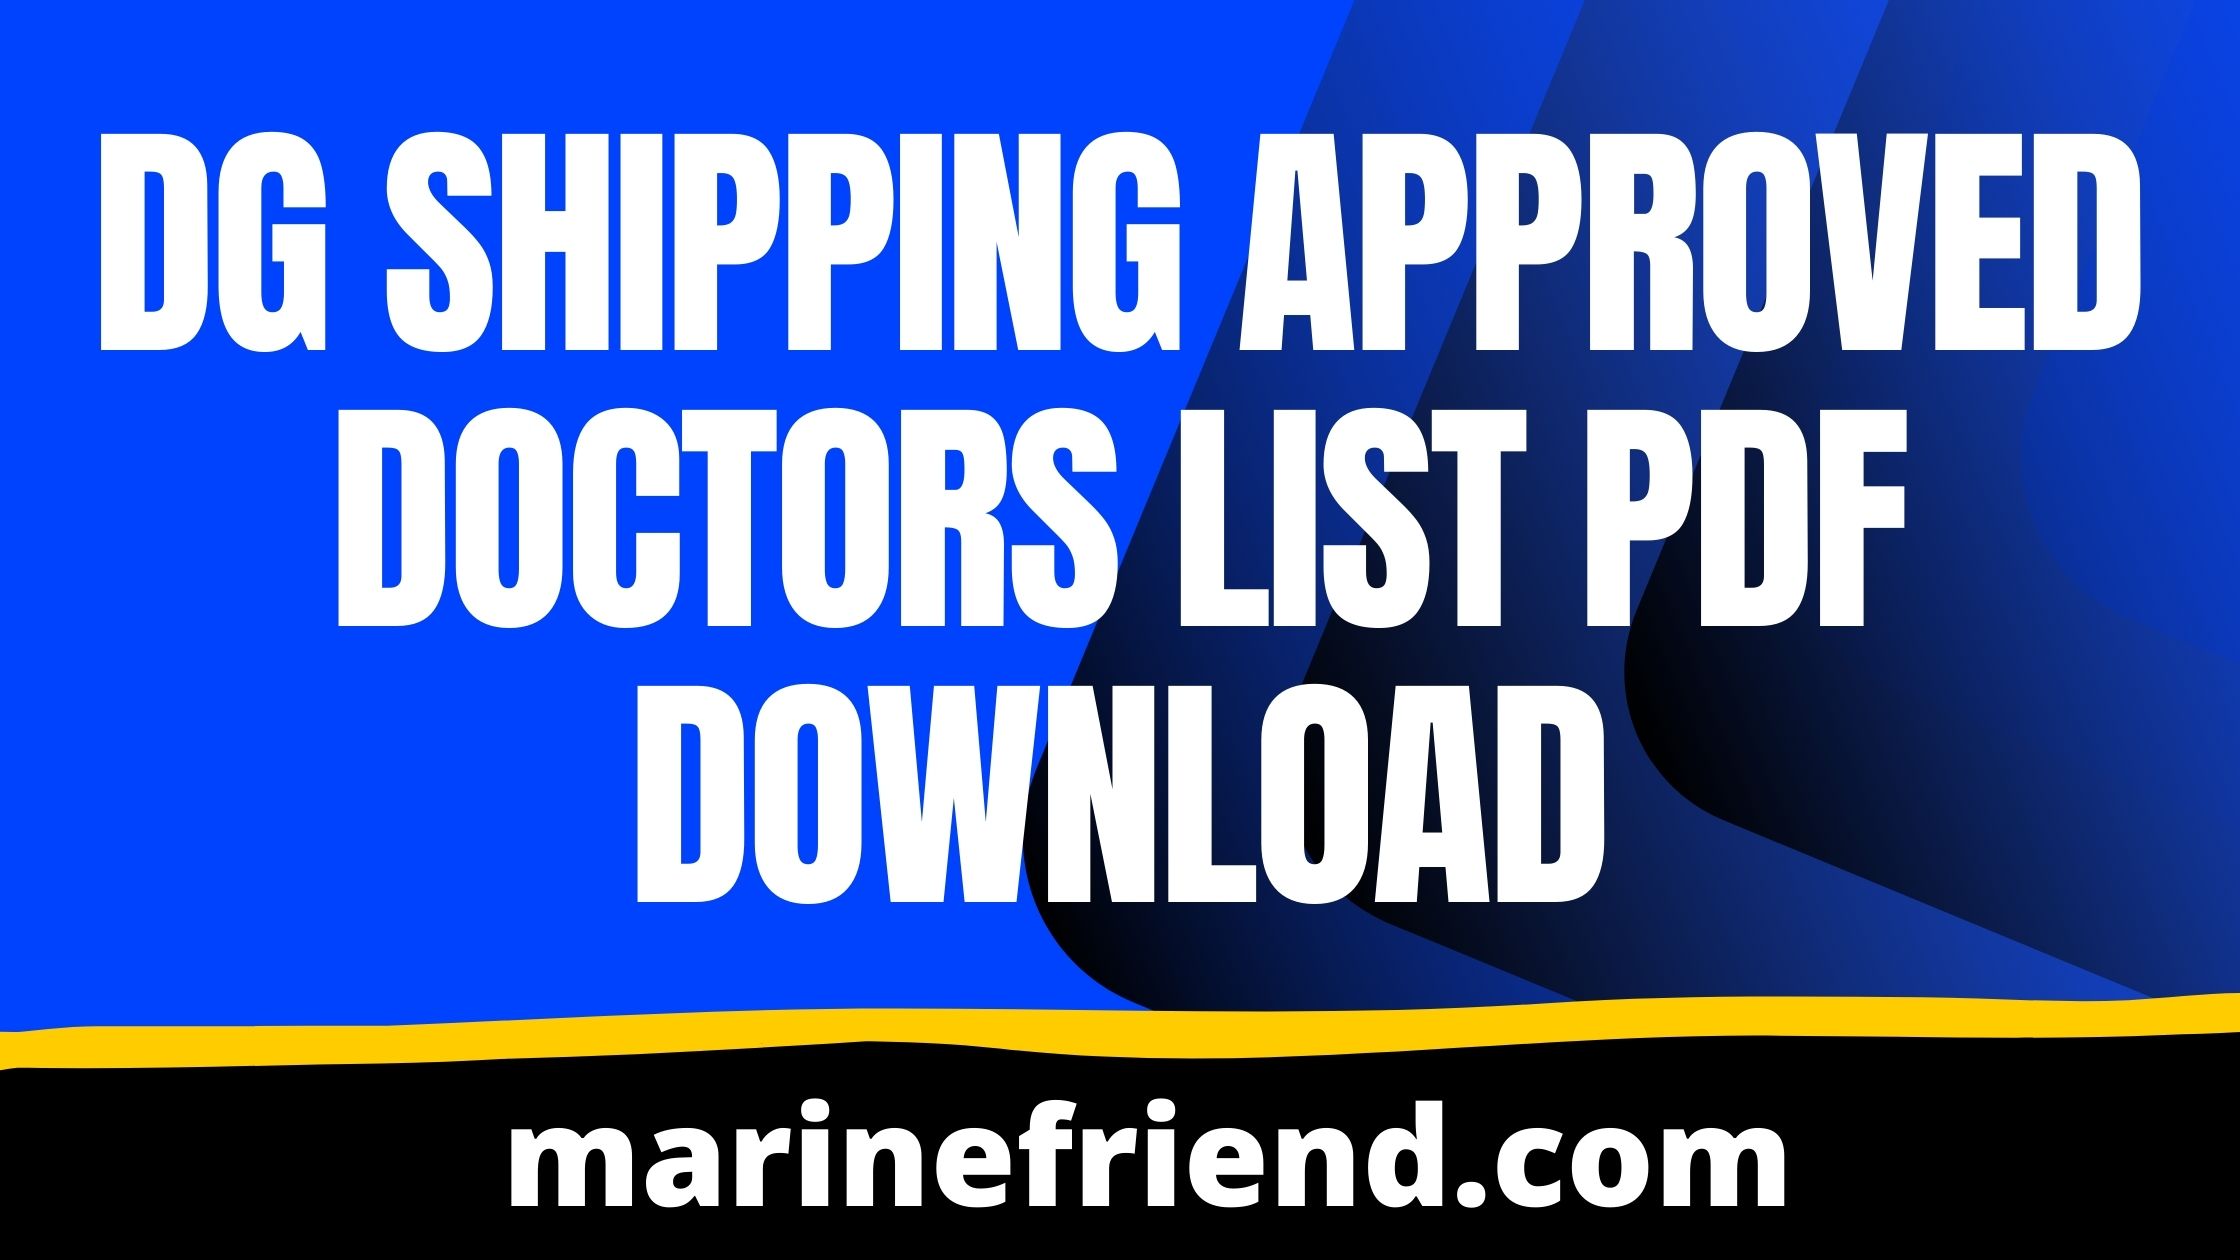 dg shipping approved doctors list 2021 pdf download